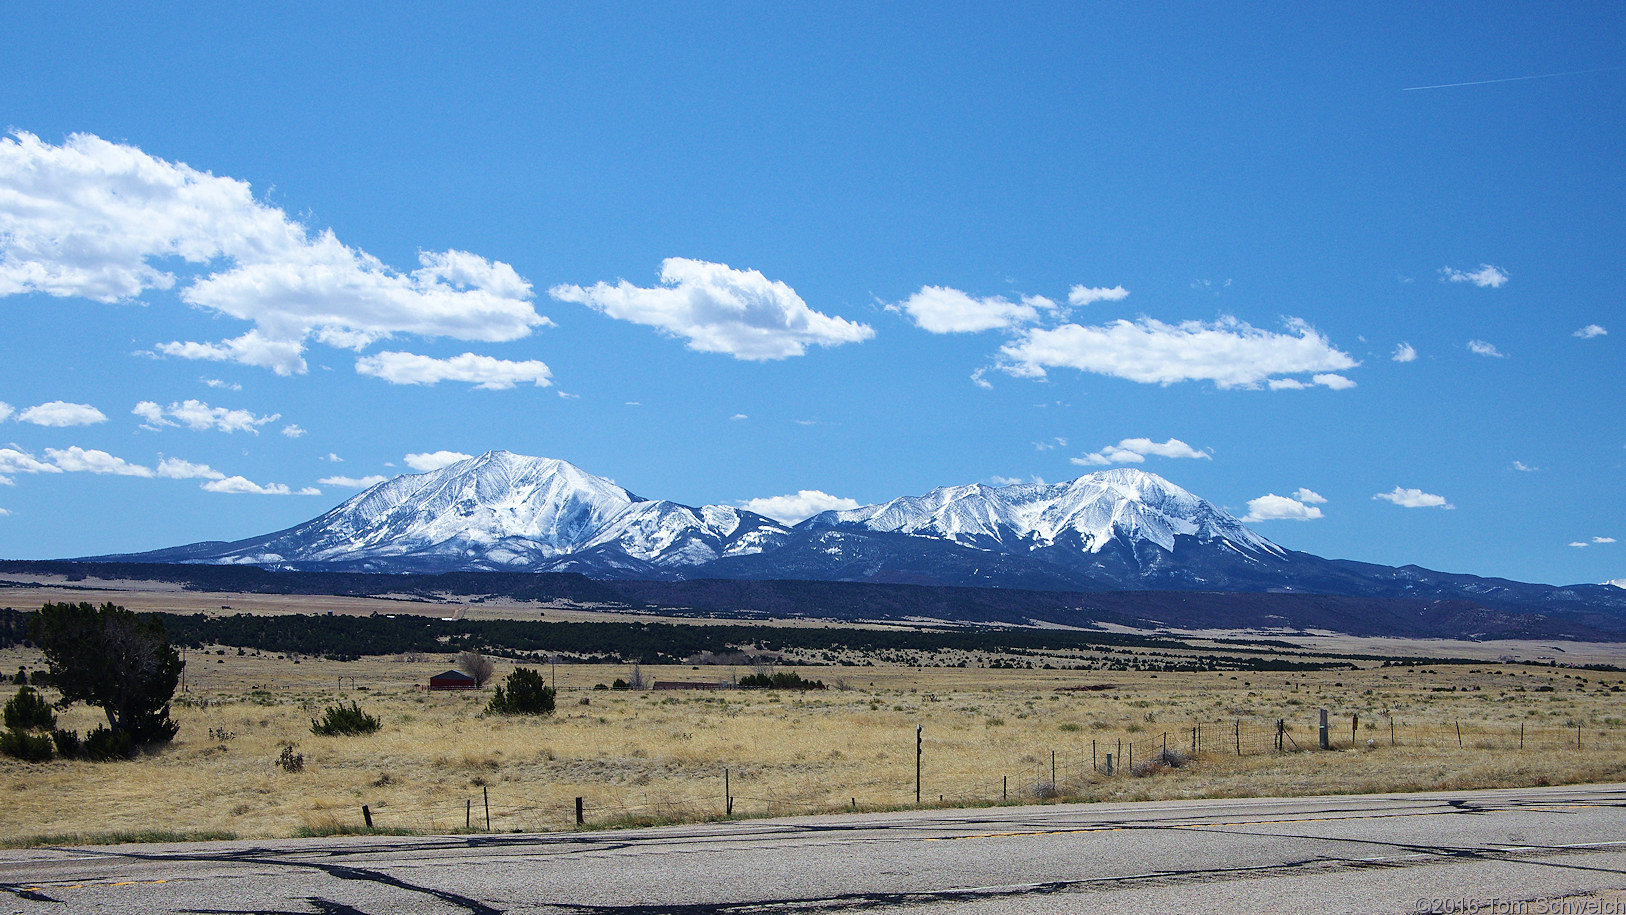 Spanish Peaks south from US Highway 160.